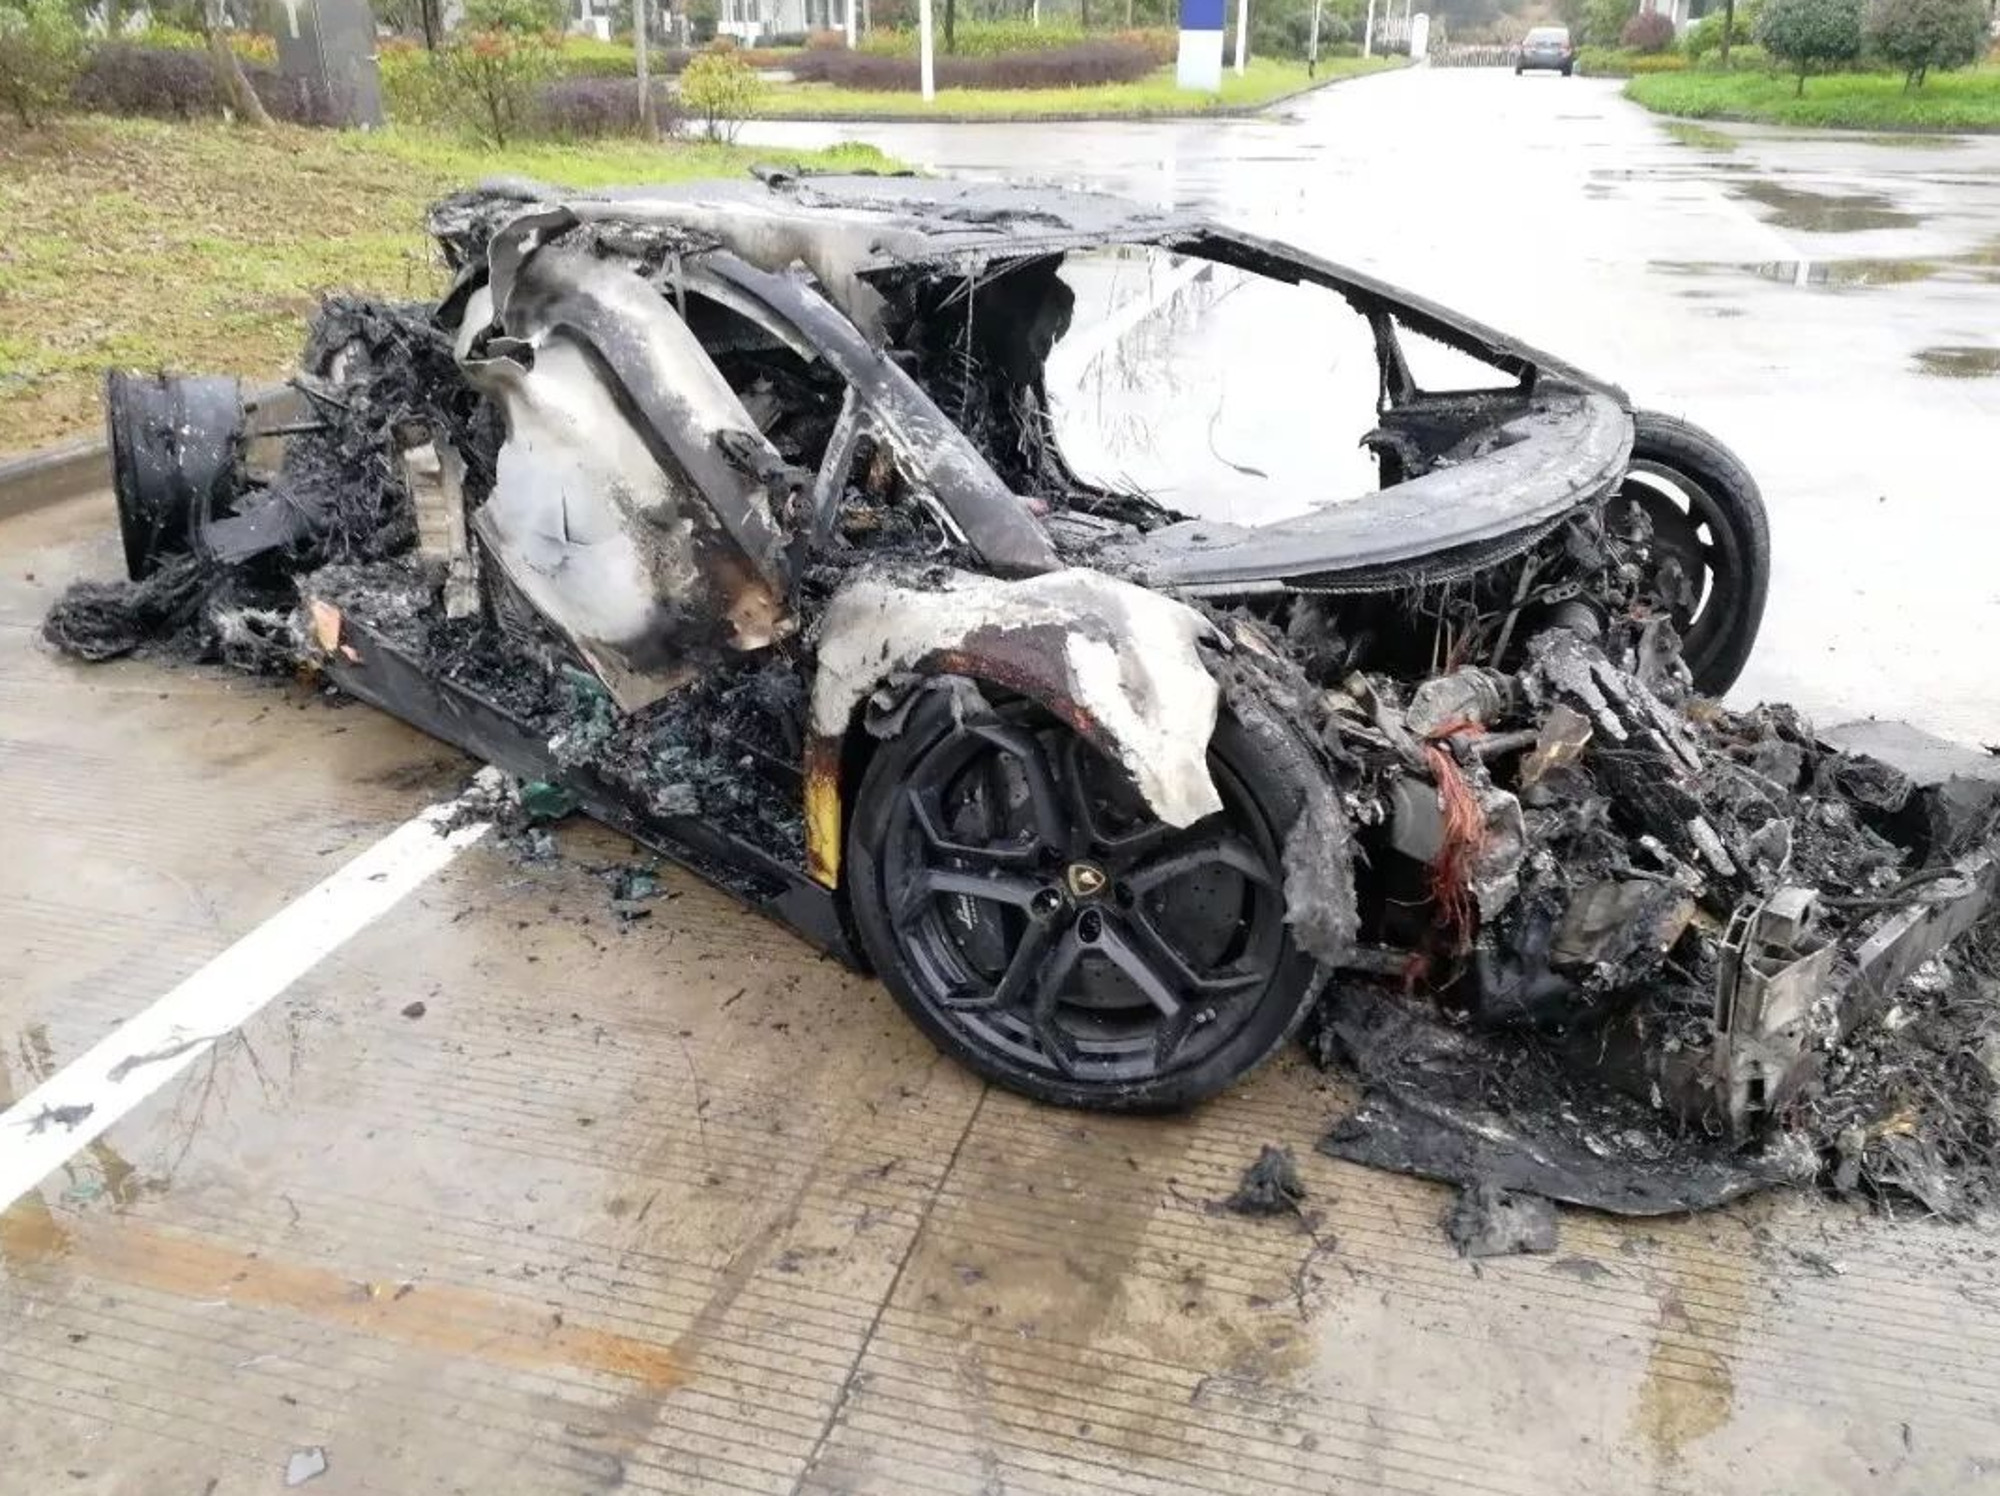 Read more about the article 685K-GBP Lambo Borrowed From Friend Goes Up In Flames